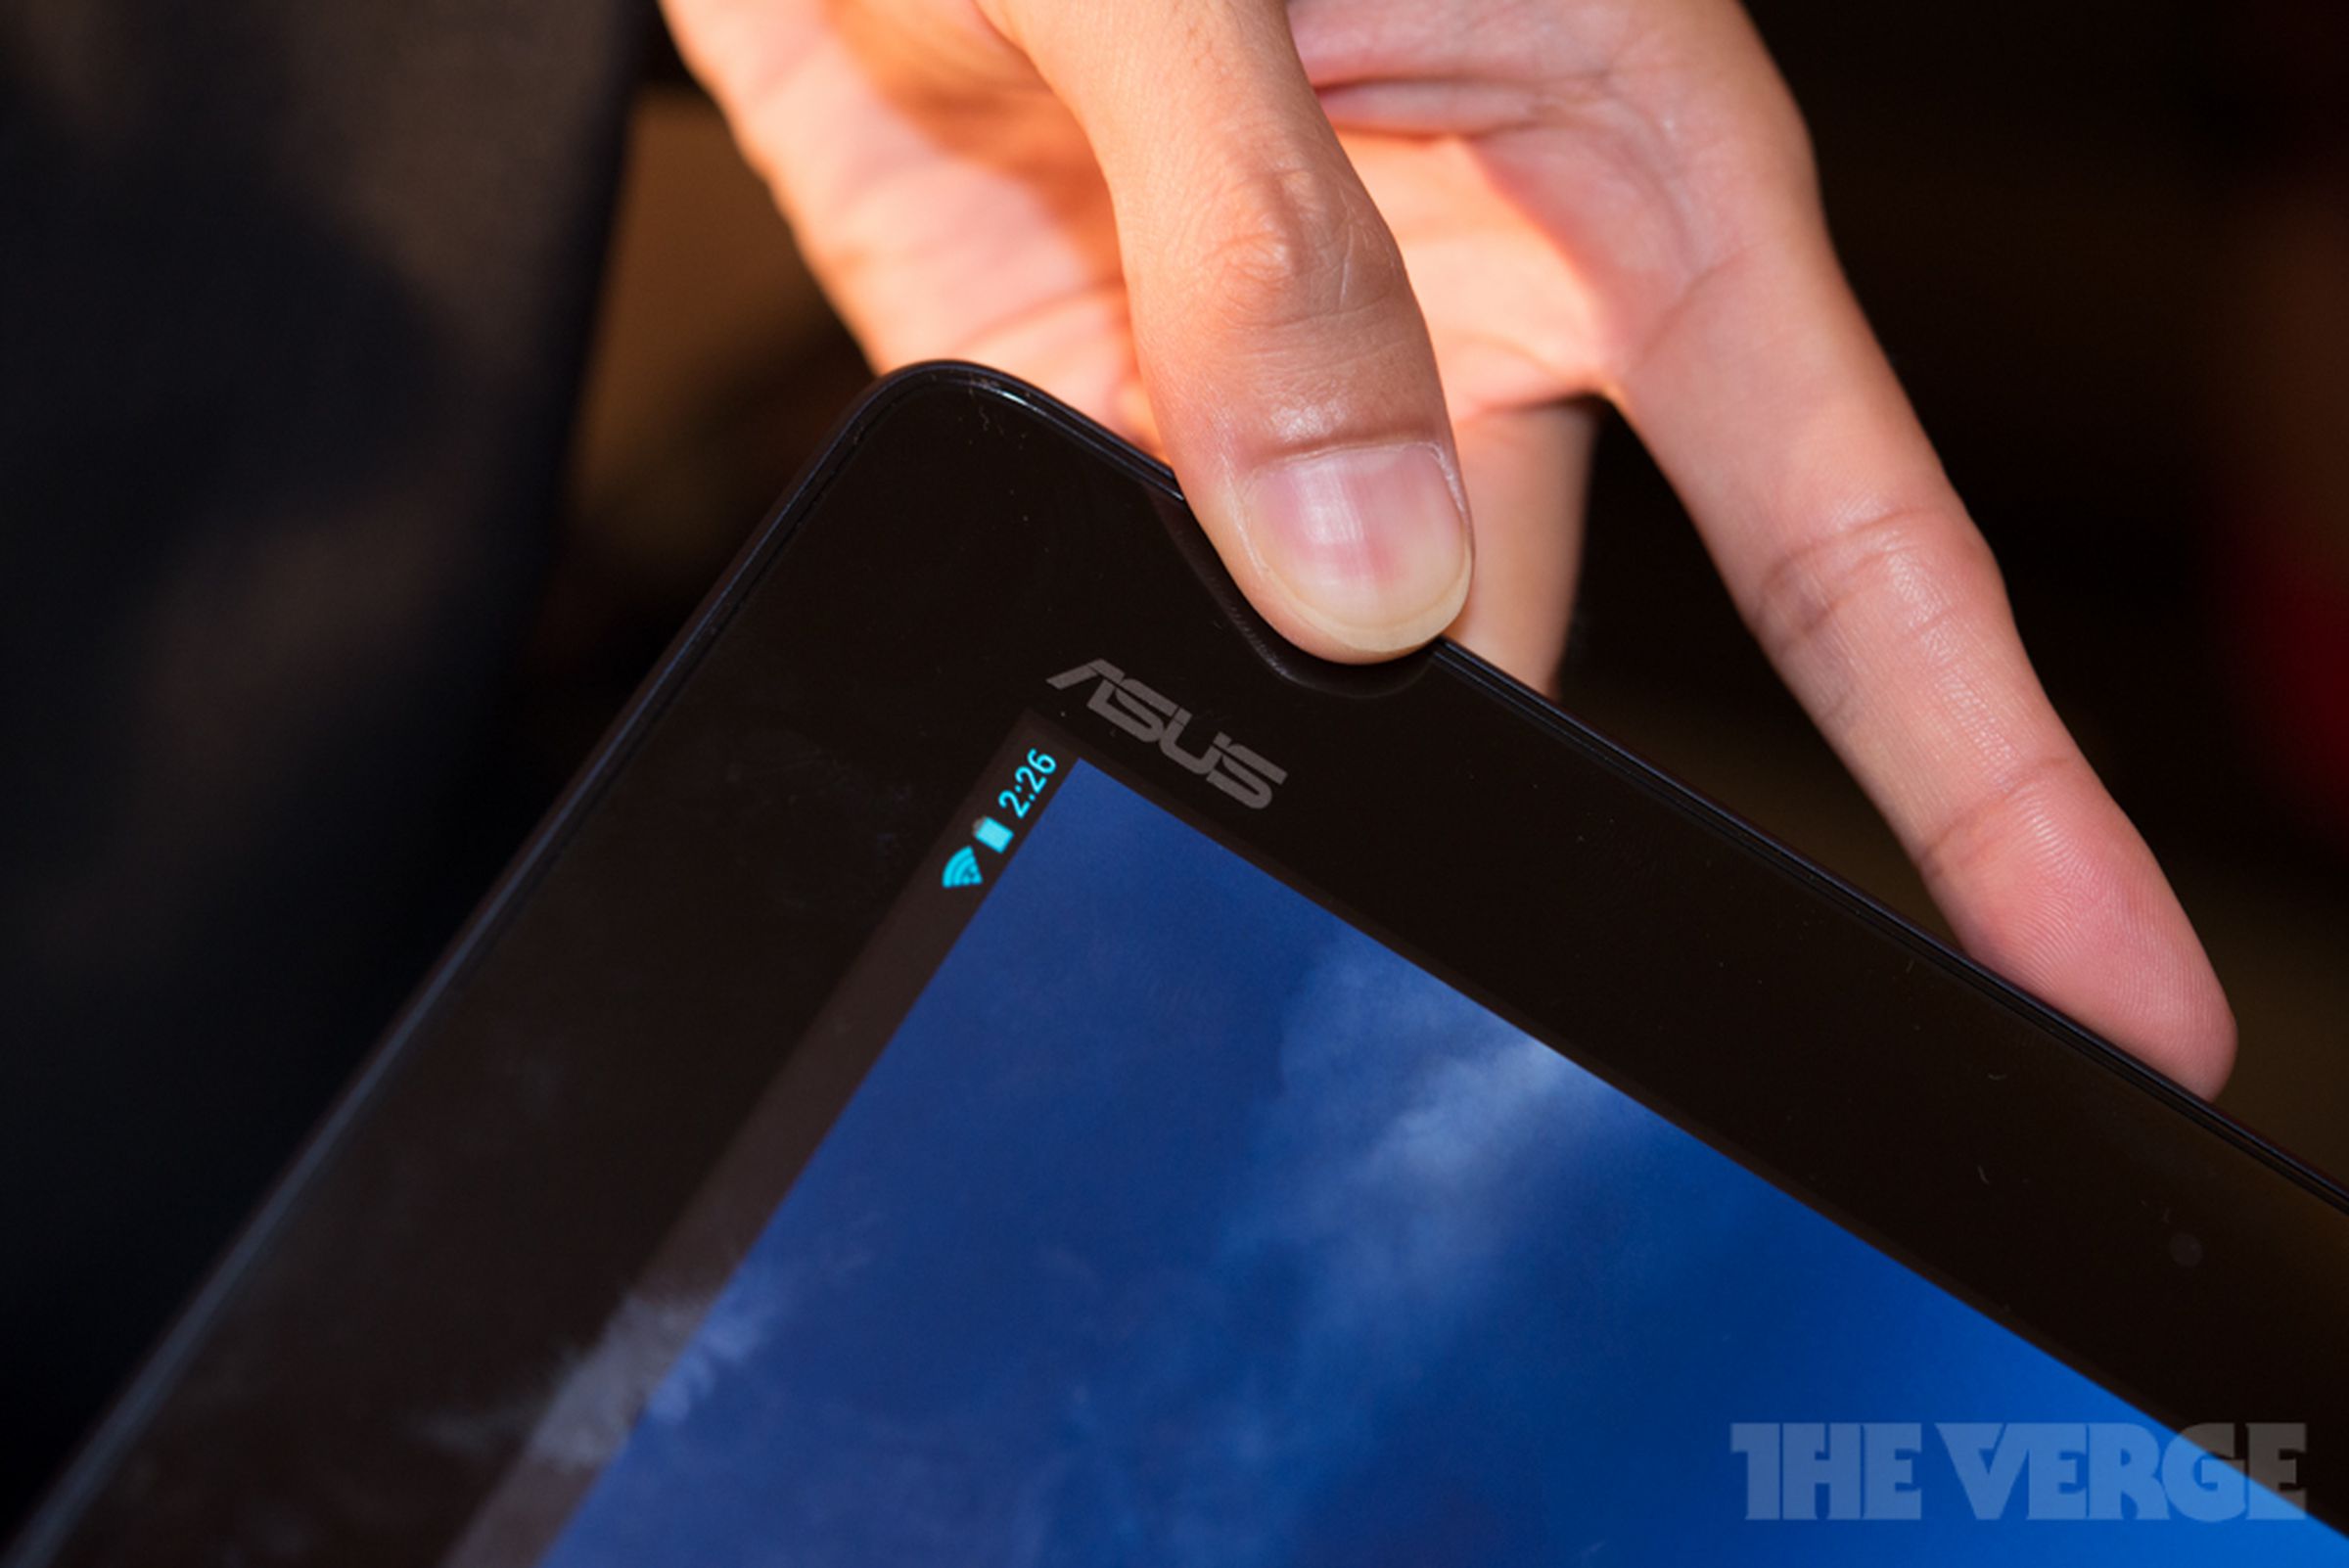 Asus Memo Pad FHD 10 hands-on pictures